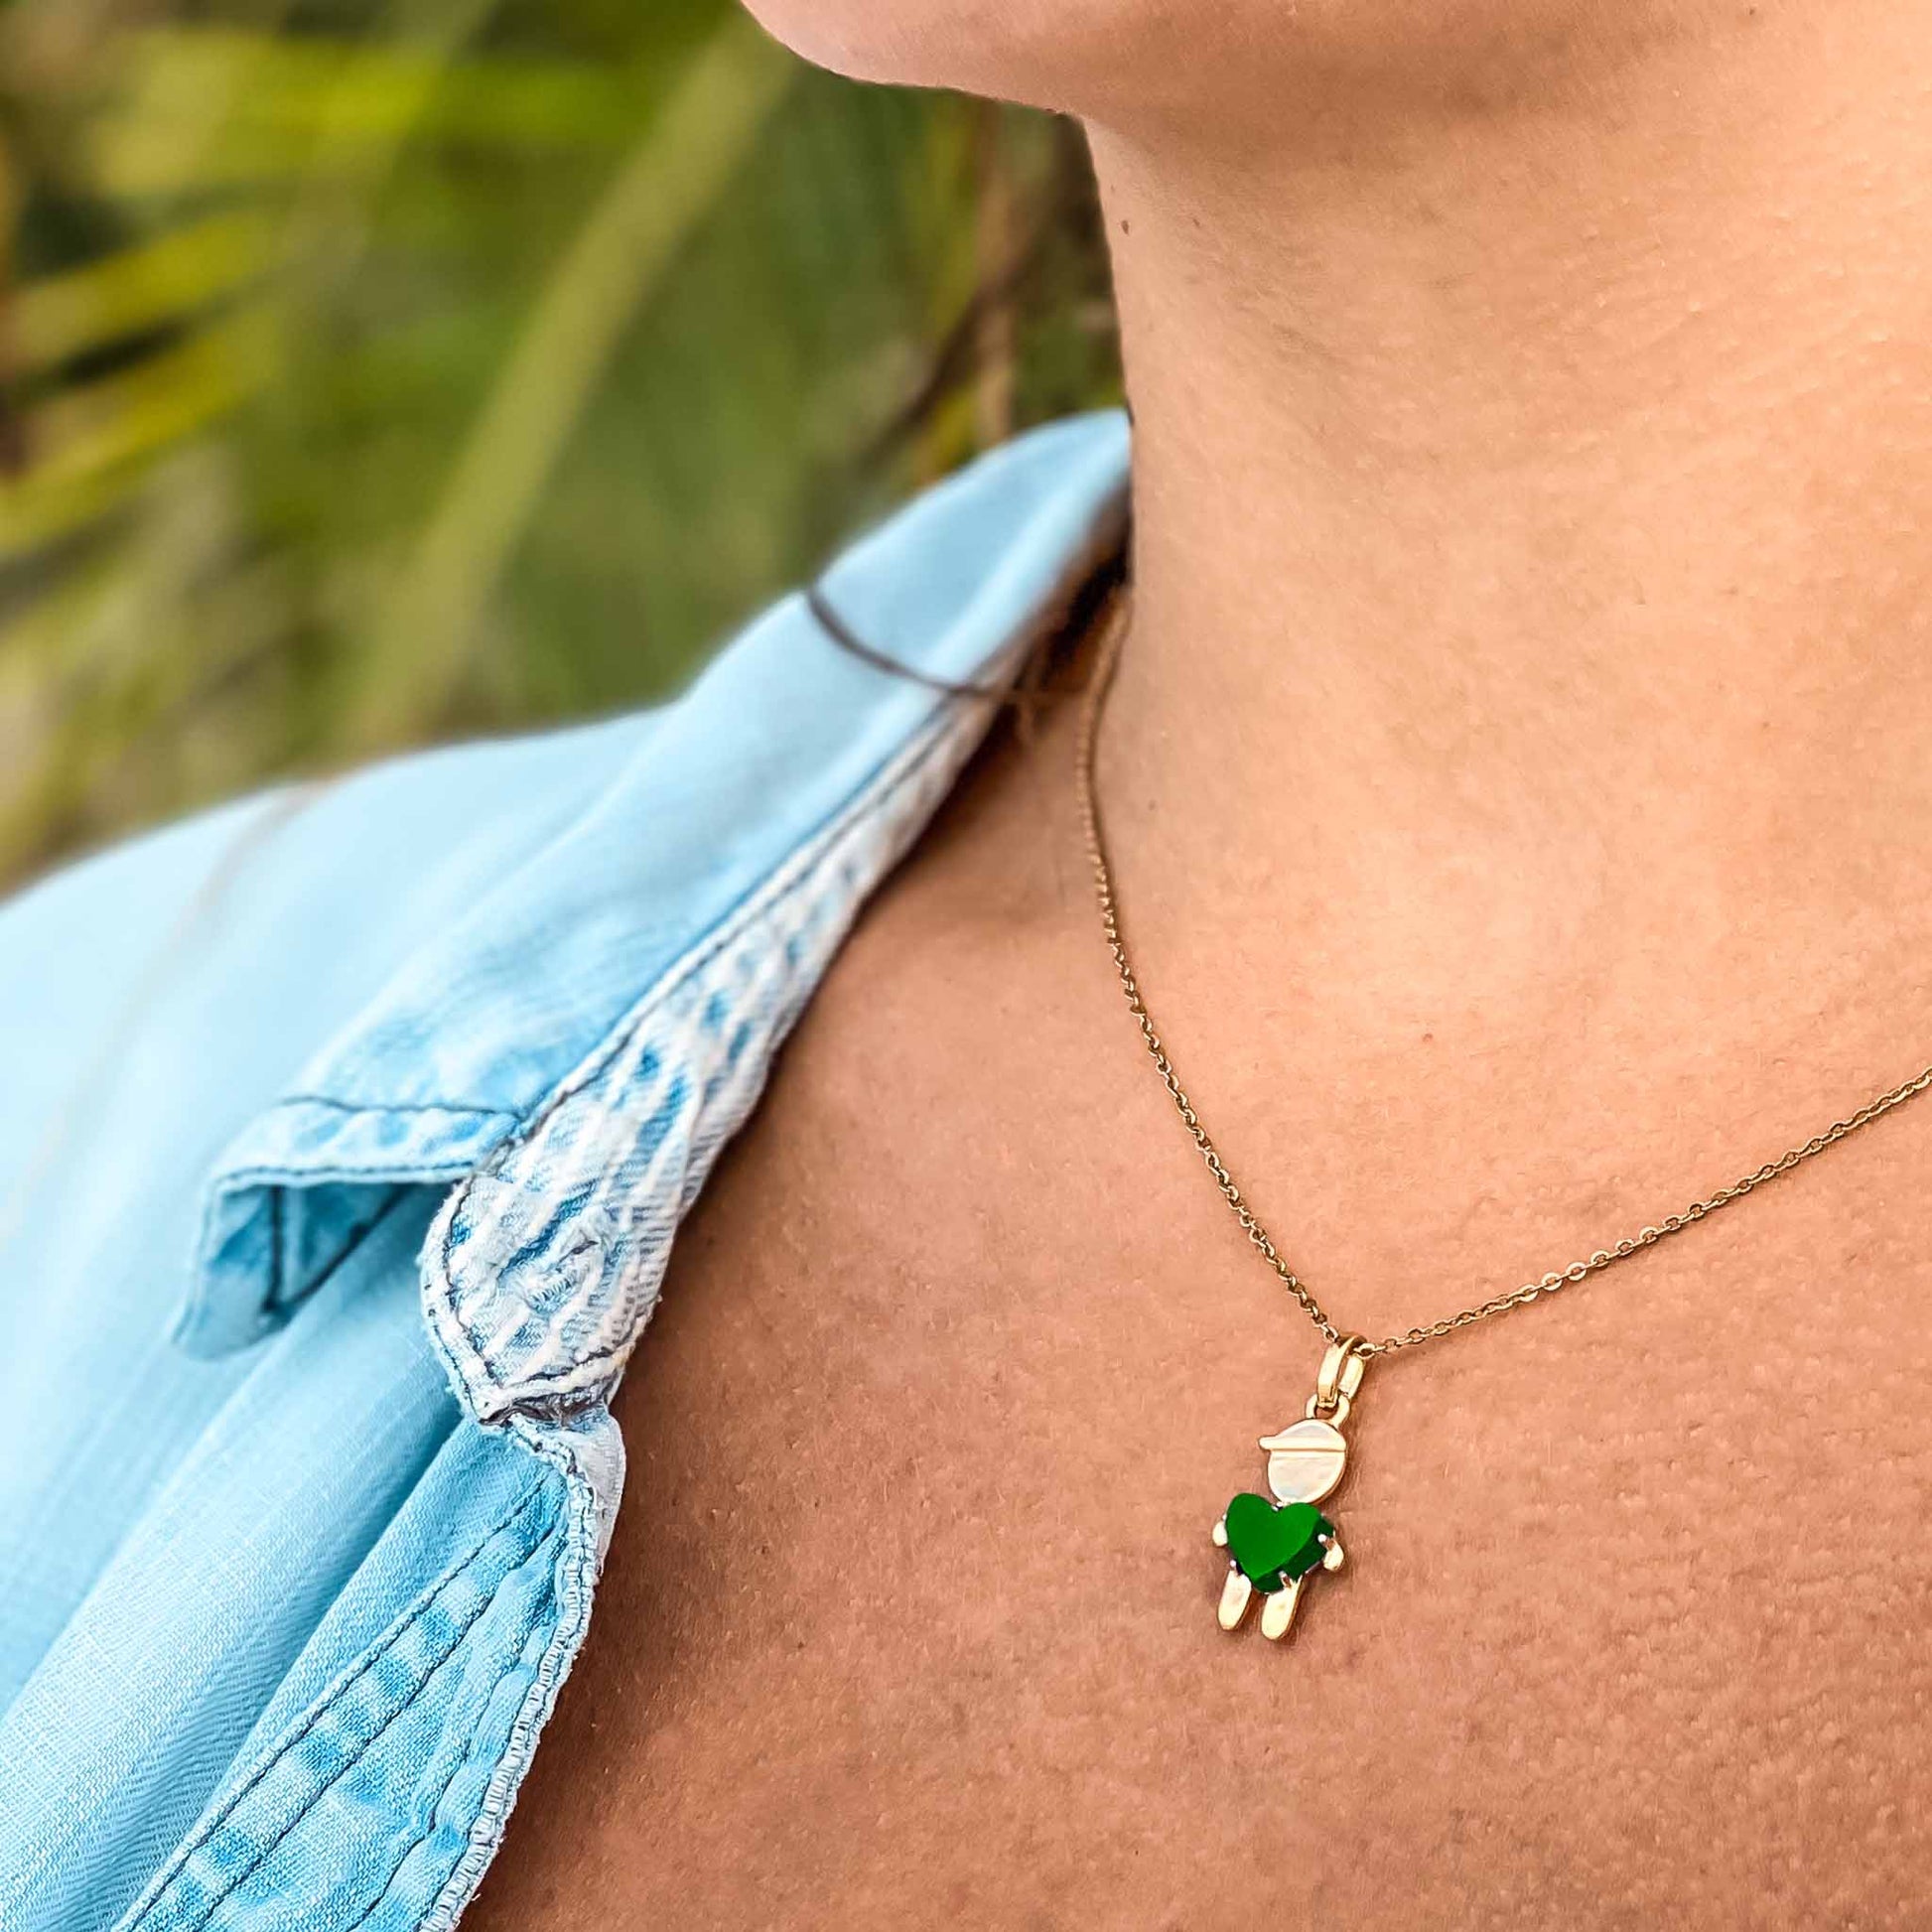 One-of-a-kind birthstone jewelry collection. This unique & meaningful birthstone charm necklace is the perfect gift for yourself, Mother's Day, Valentine's Day, baby shower, Christmas & birthdays. A personalized gift idea for every mom, mom-to-be, grandma, bride, bridesmaid, daughter, wife, mother-in-law & loved one.